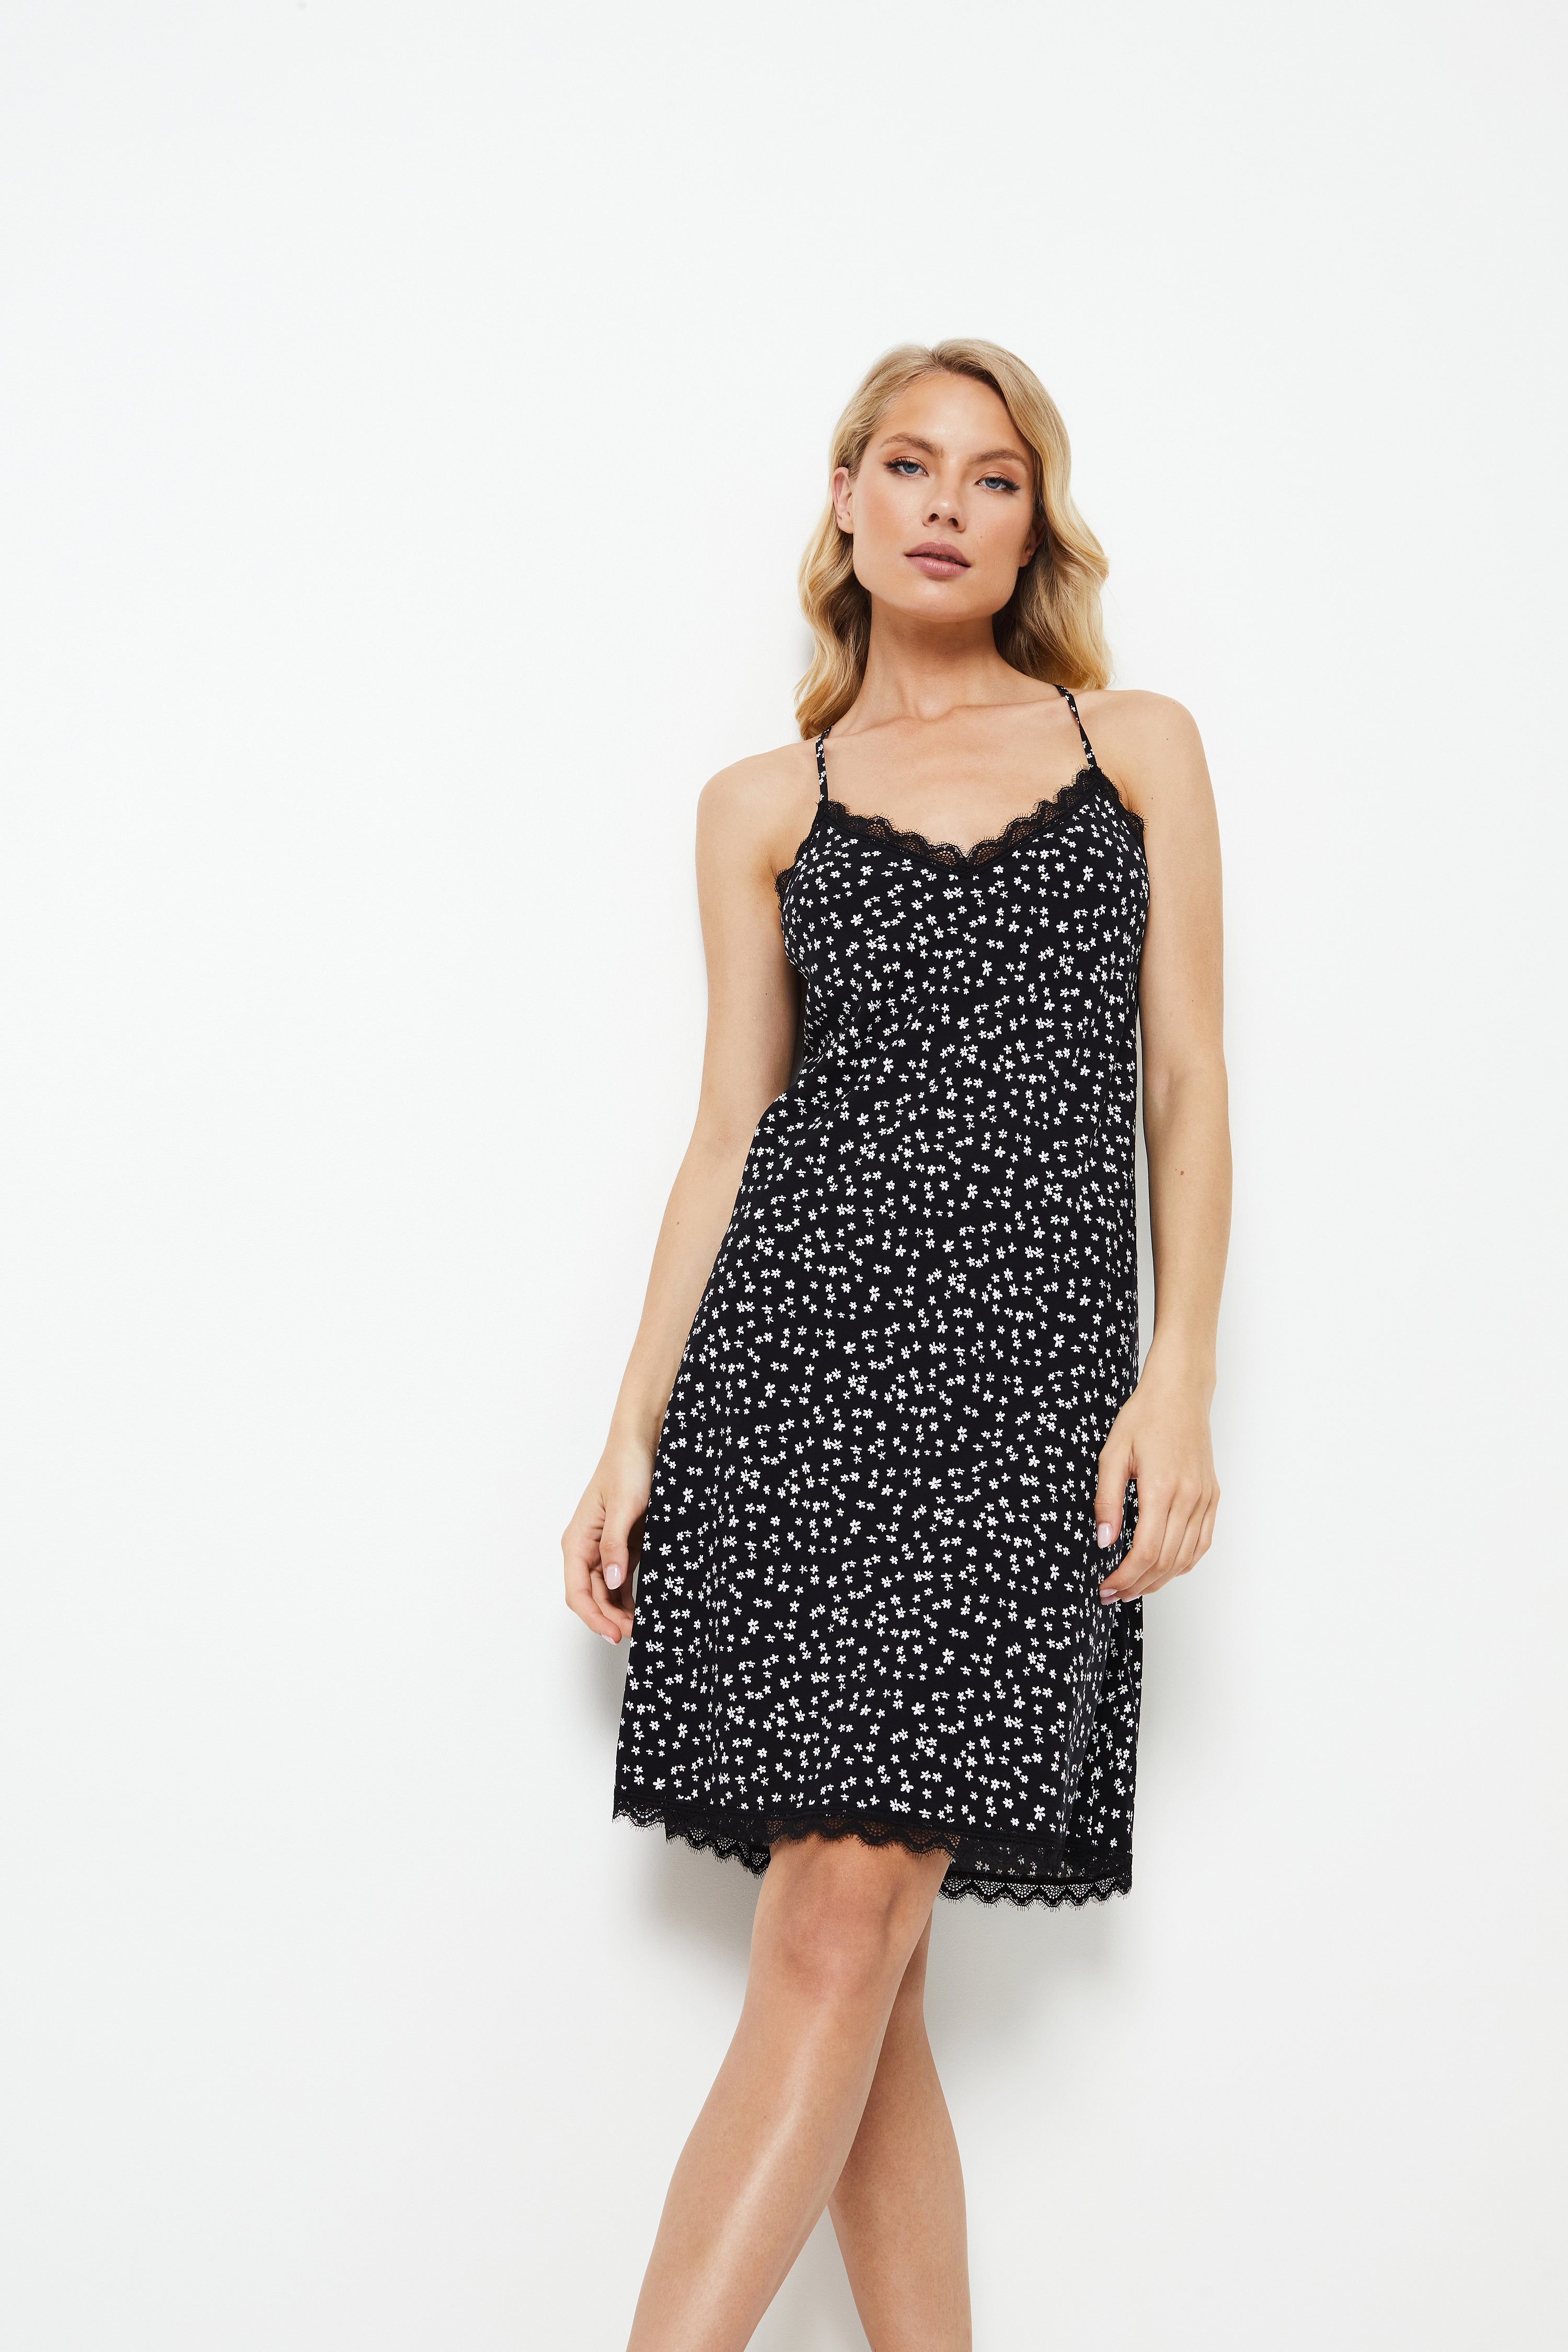 Aruelle Giulia black and white floral nightdress in viscose and featuring a v neckline.&nbsp;Indulge in the luxurious comfort as you sleep wearing the pretty Black Nightdress. 